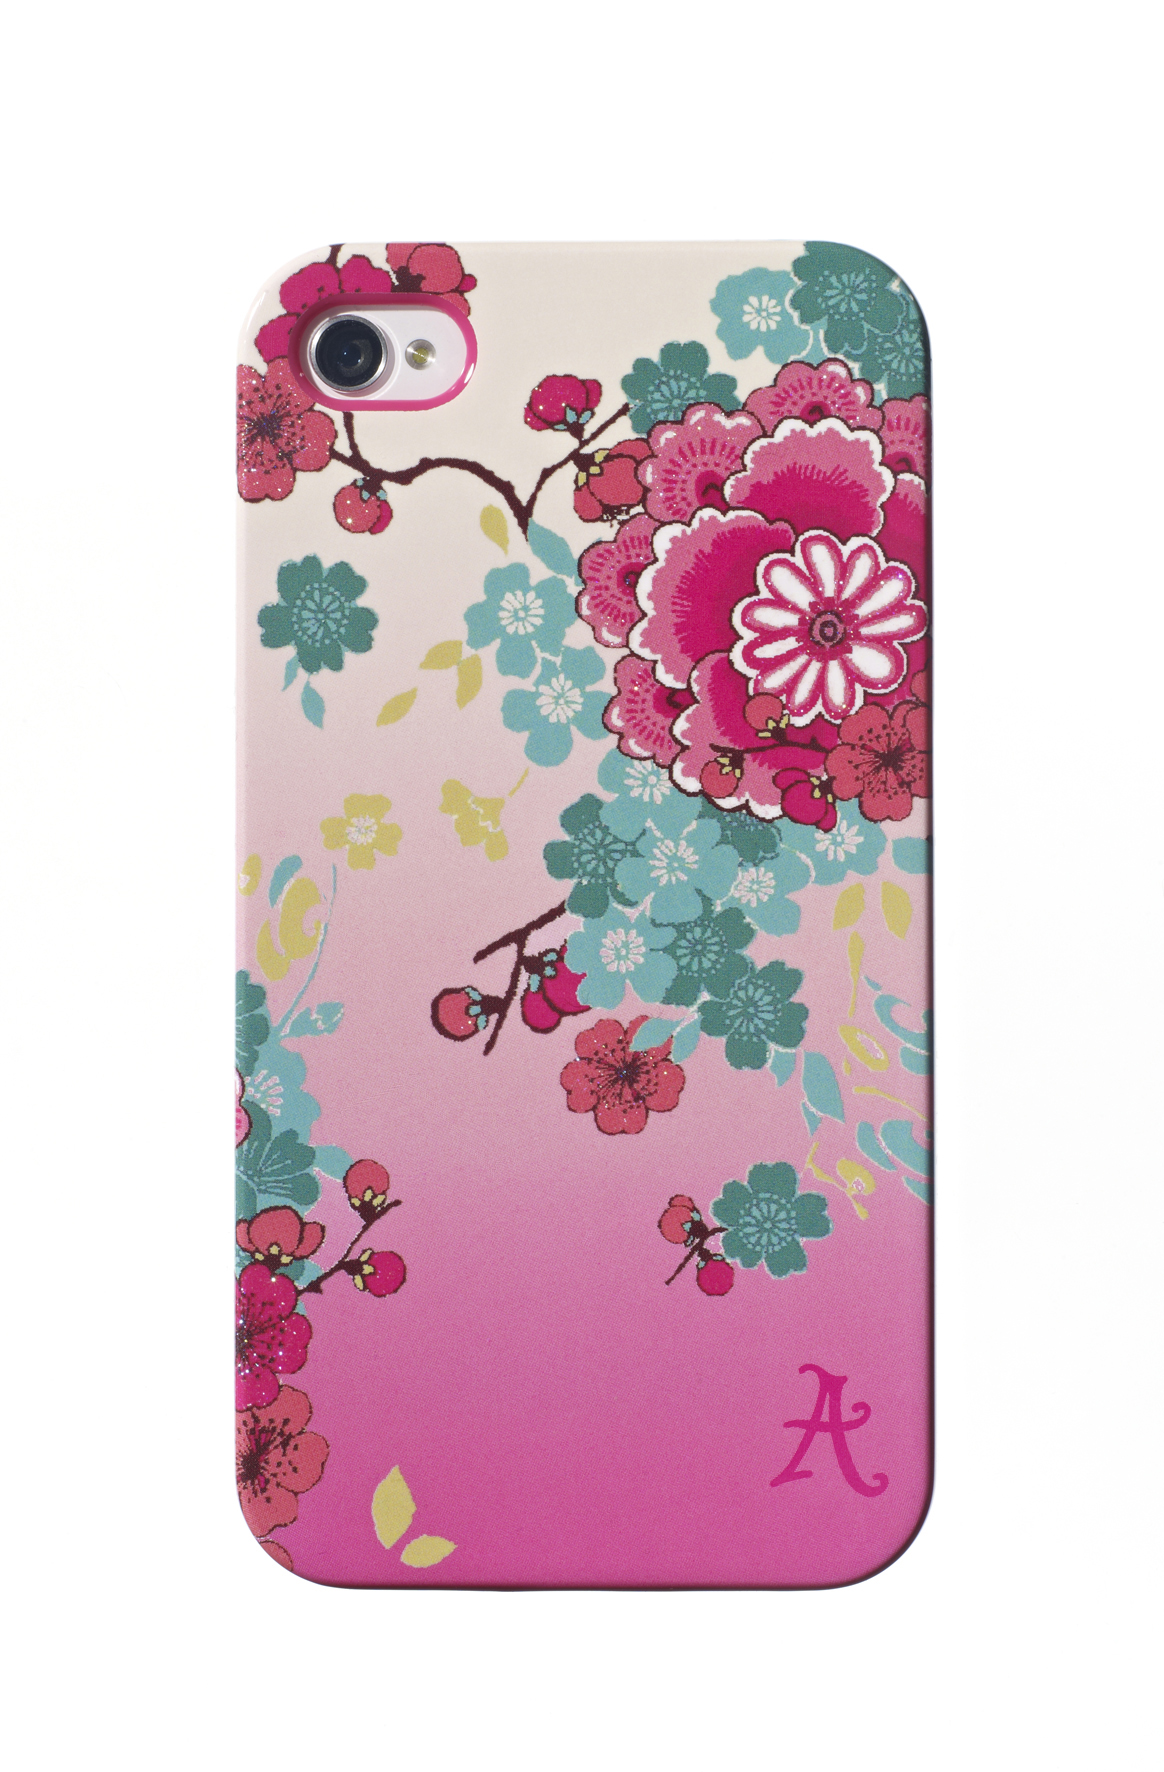 IPAC-C1-PFLW-I5, Apple, ACCESSORIZE iPhone 5s, 5, Pink Flower iPhone